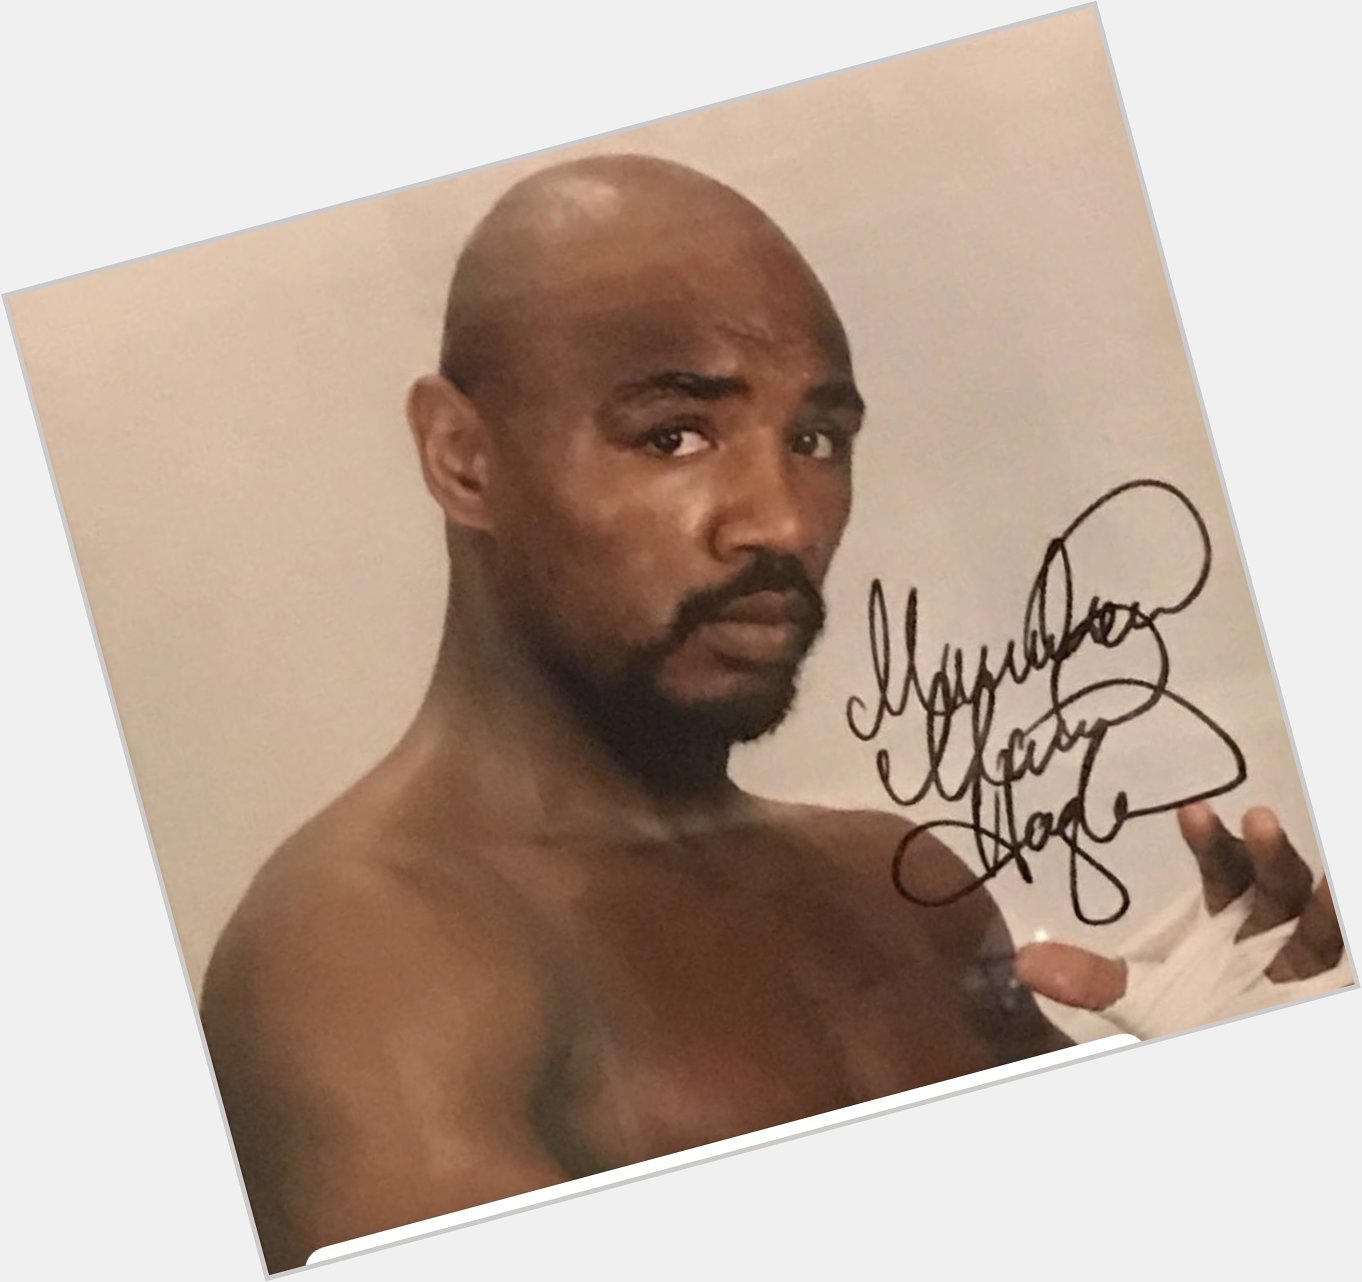 Happy birthday, Marvin Hagler! I miss watching you fight. 